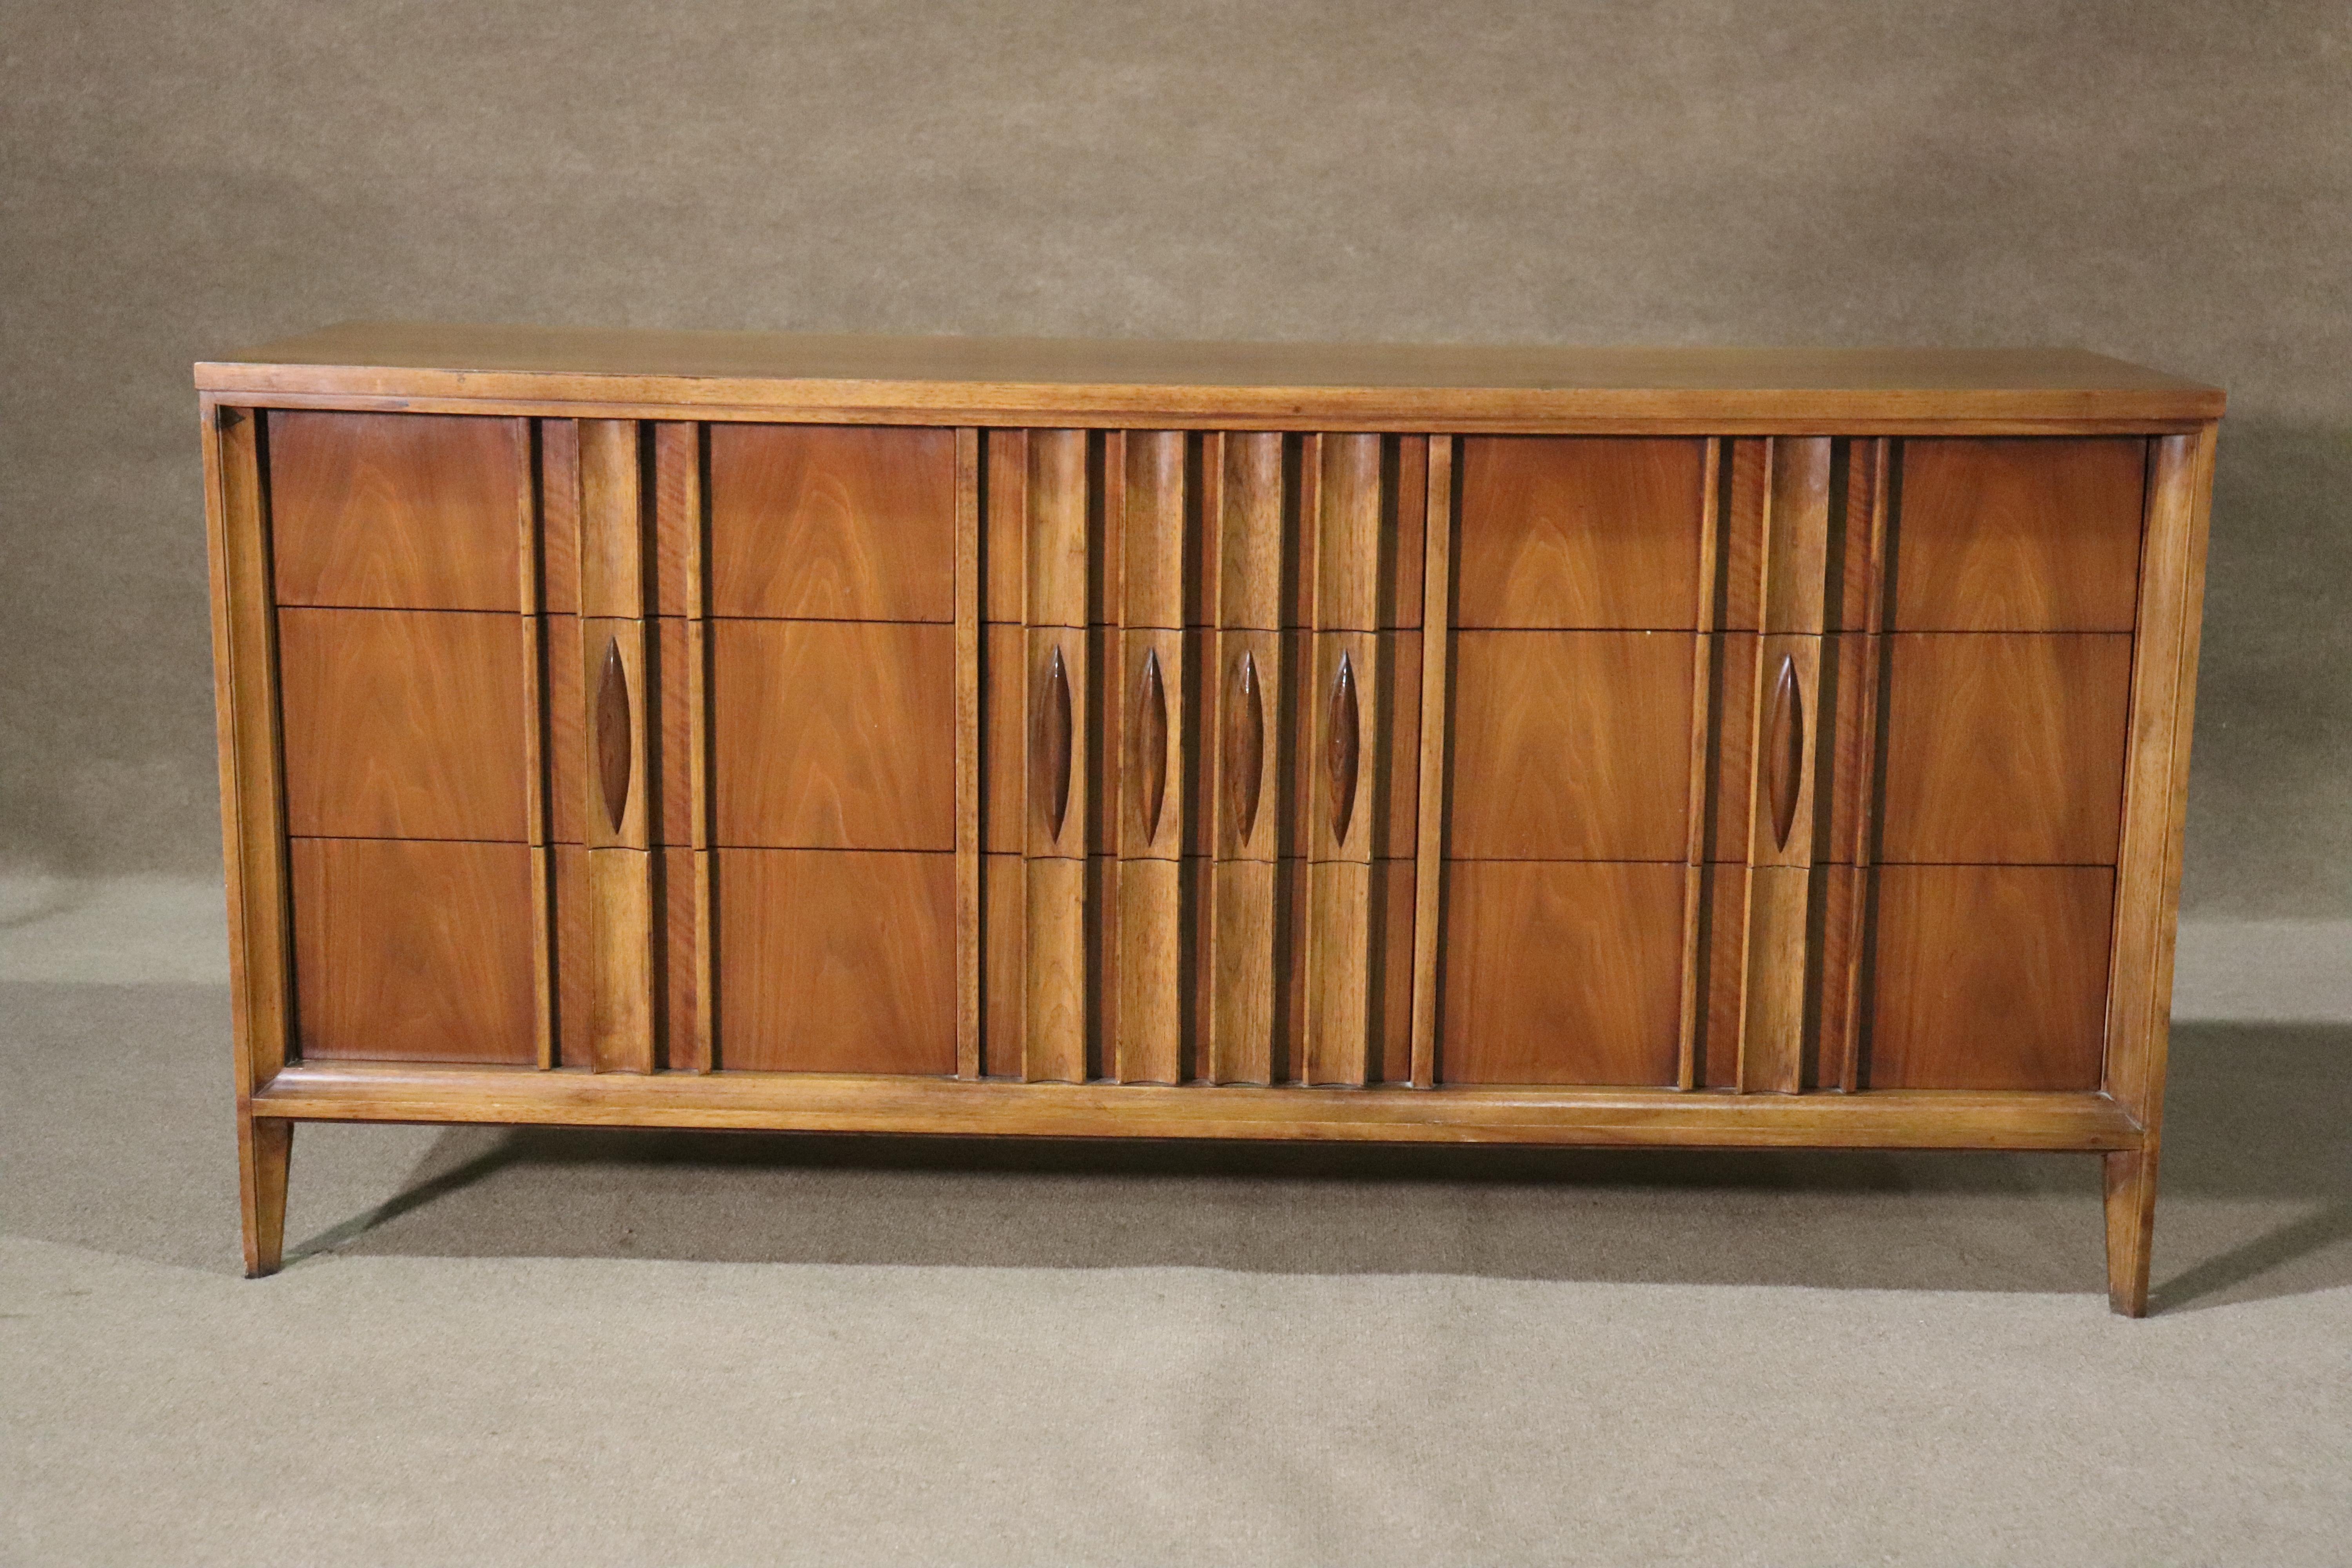 Long nine drawer dresser by Thomasville with sculpted front drawers. Walnut grain with accenting rosewood ellipses.
Please confirm location NY or NJ